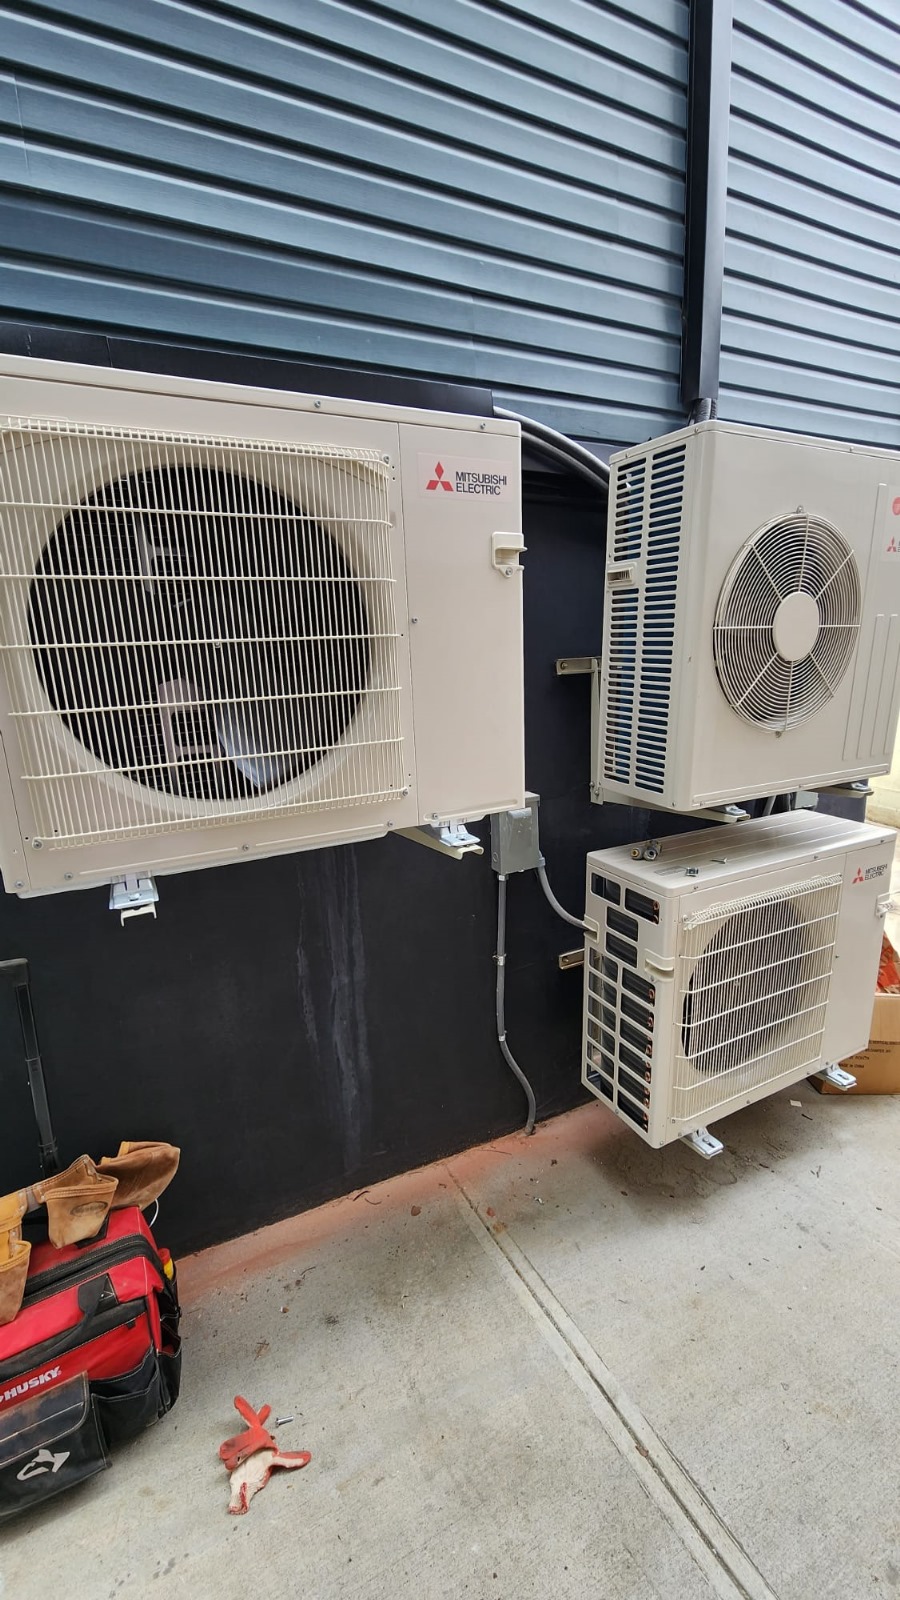 Peregrine Heating and Cooling